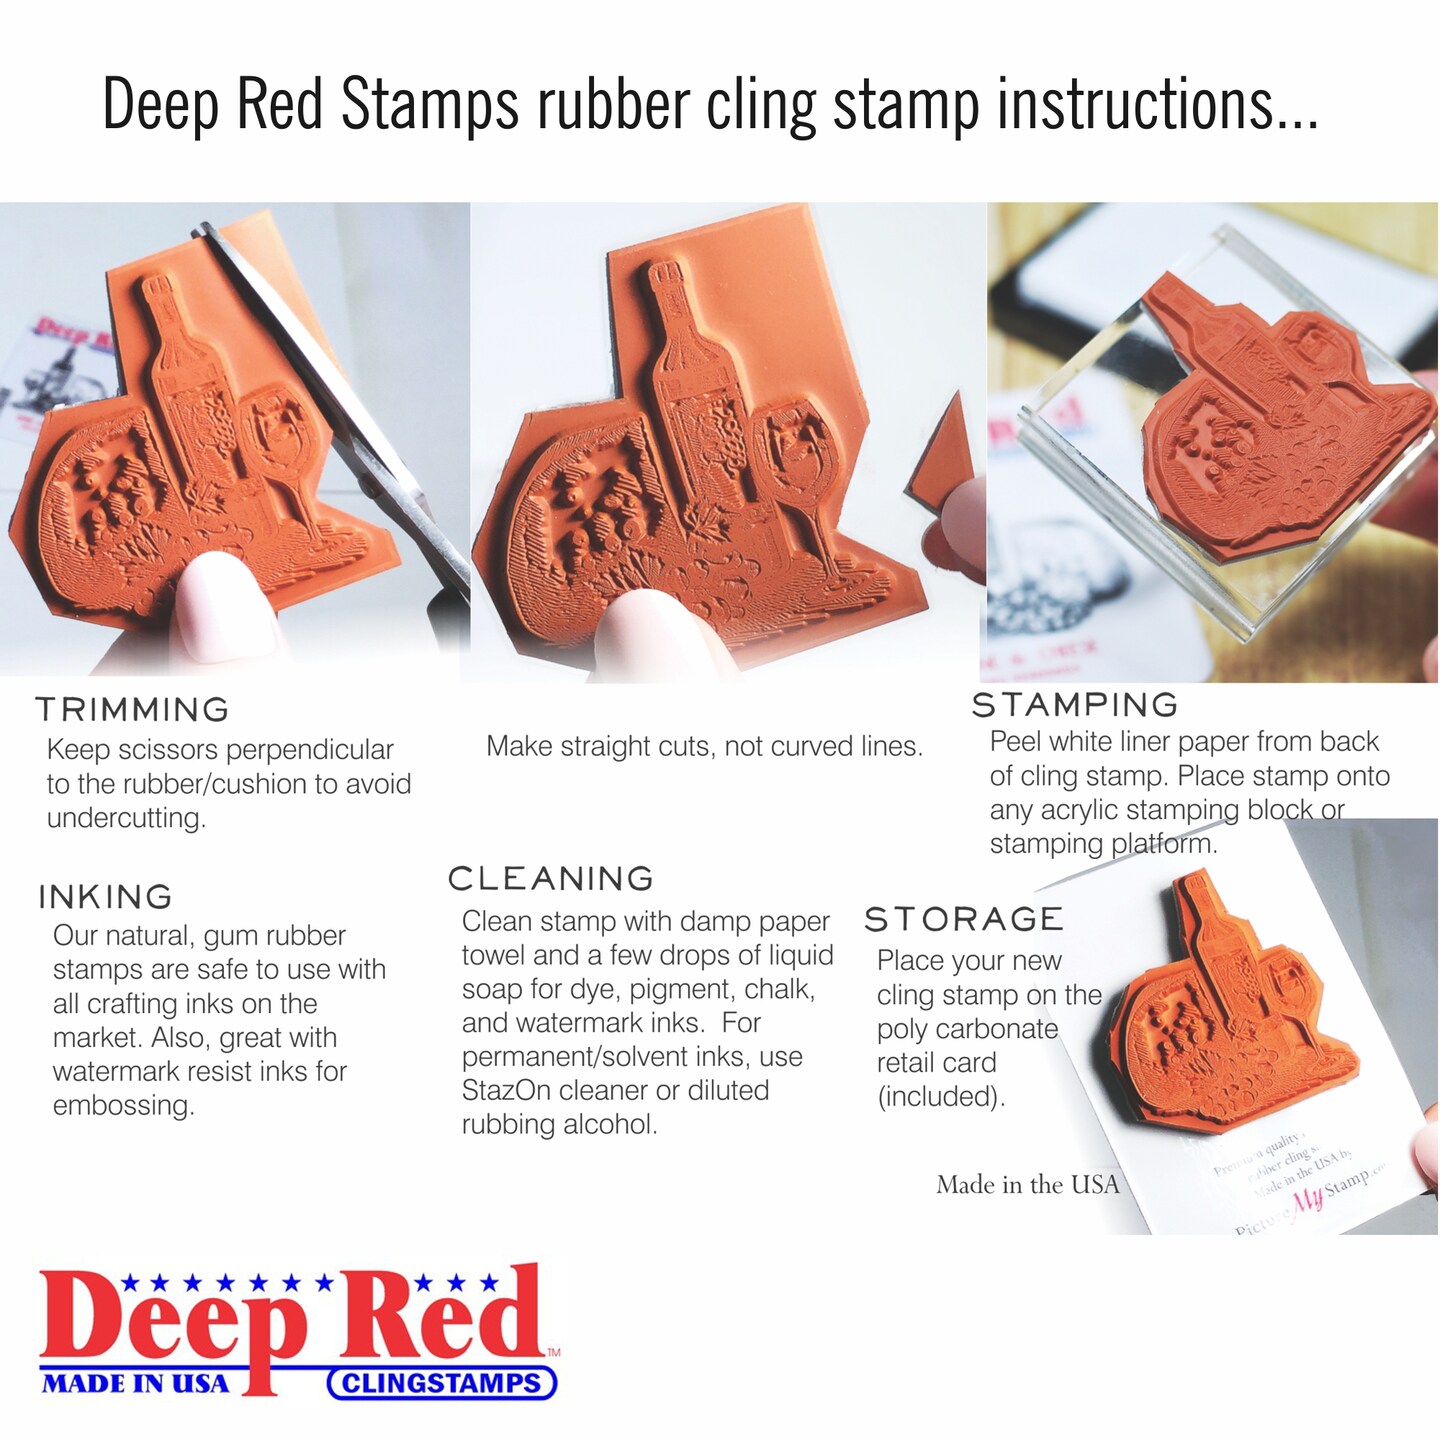 Deep Red Stamps Alice Potion Rubber Stamp 2.1 x 3.1  inches